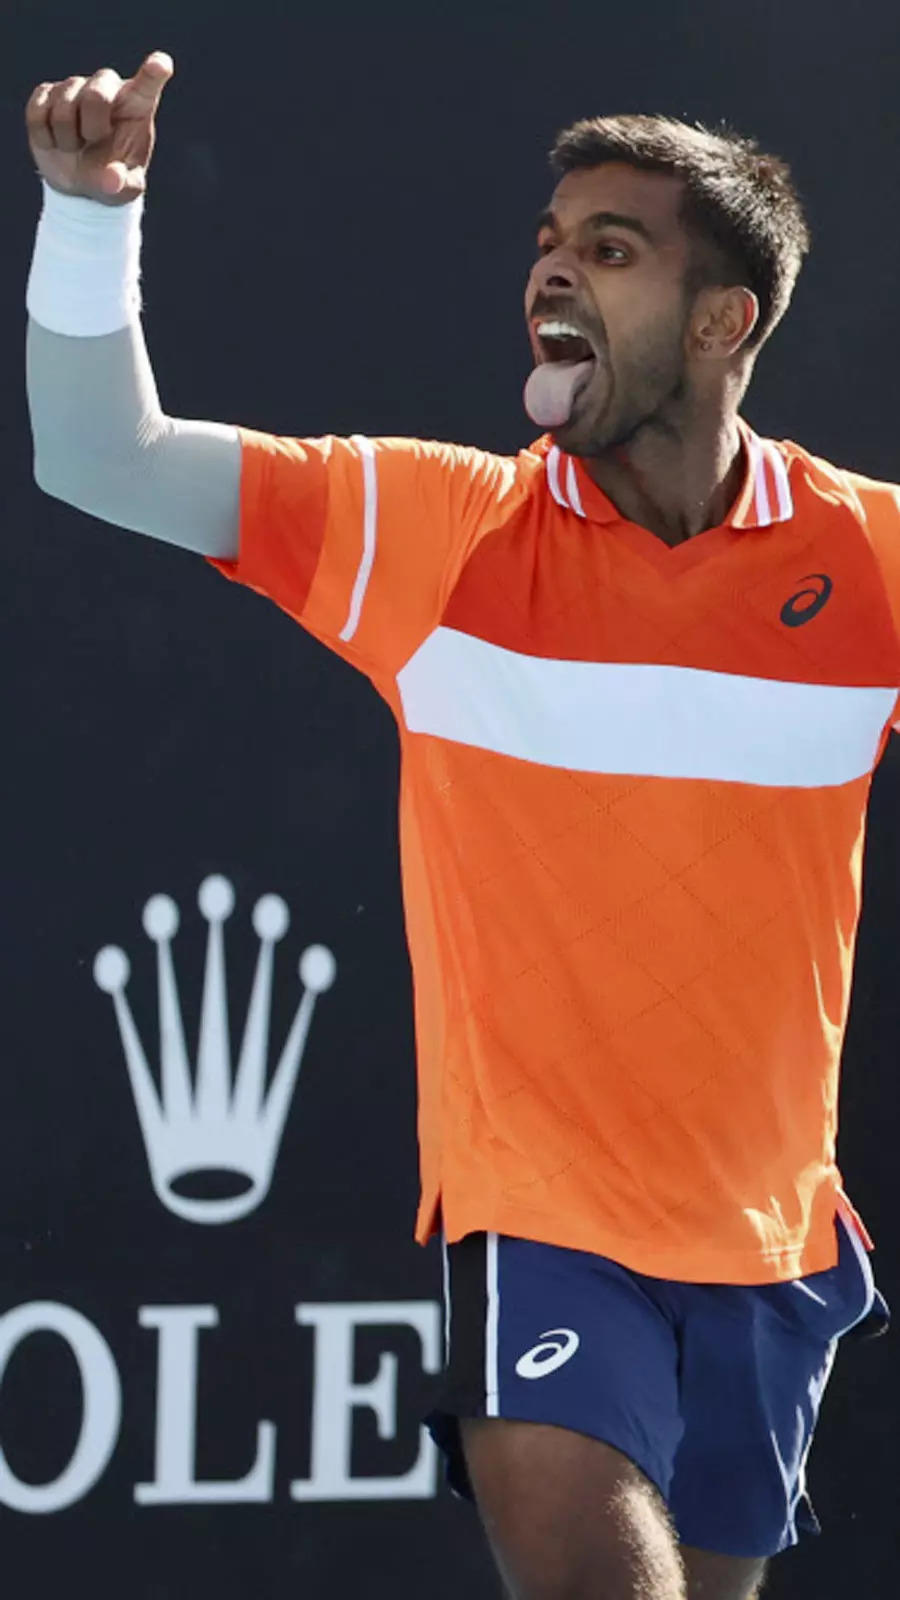 Sumit Nagal guaranteed big payday after stunning win in Australian Open